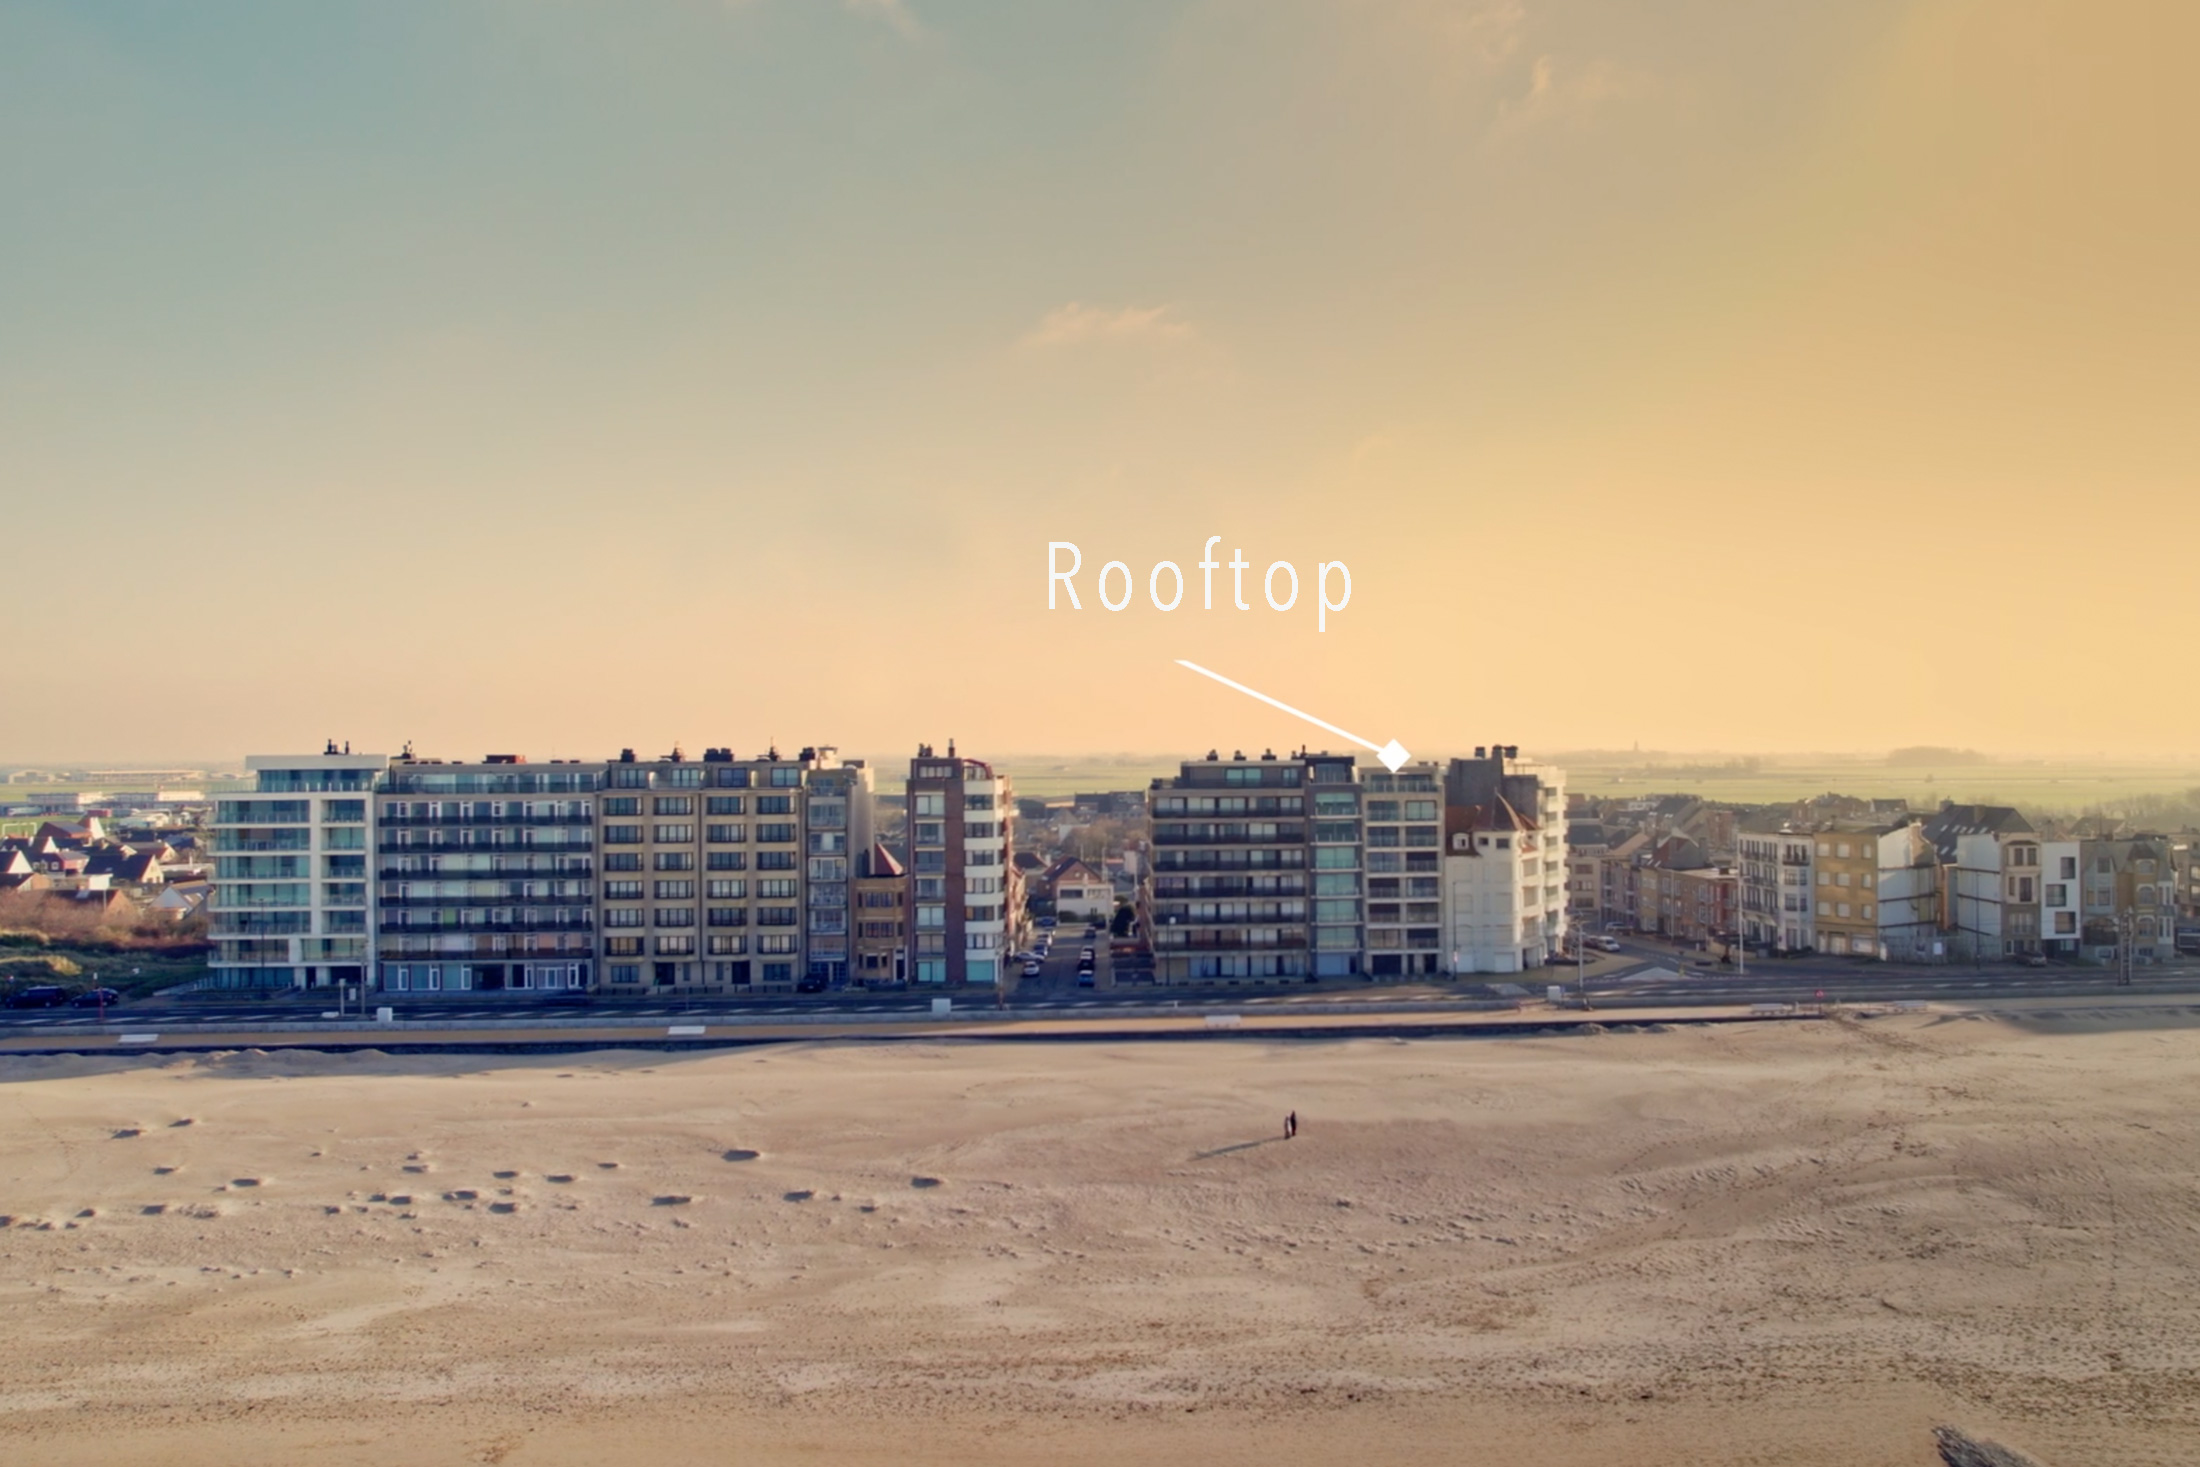 https://water-land.be/site/wp-content/uploads/2023/03/ROOFTOP-OOSTENDE-5.jpg